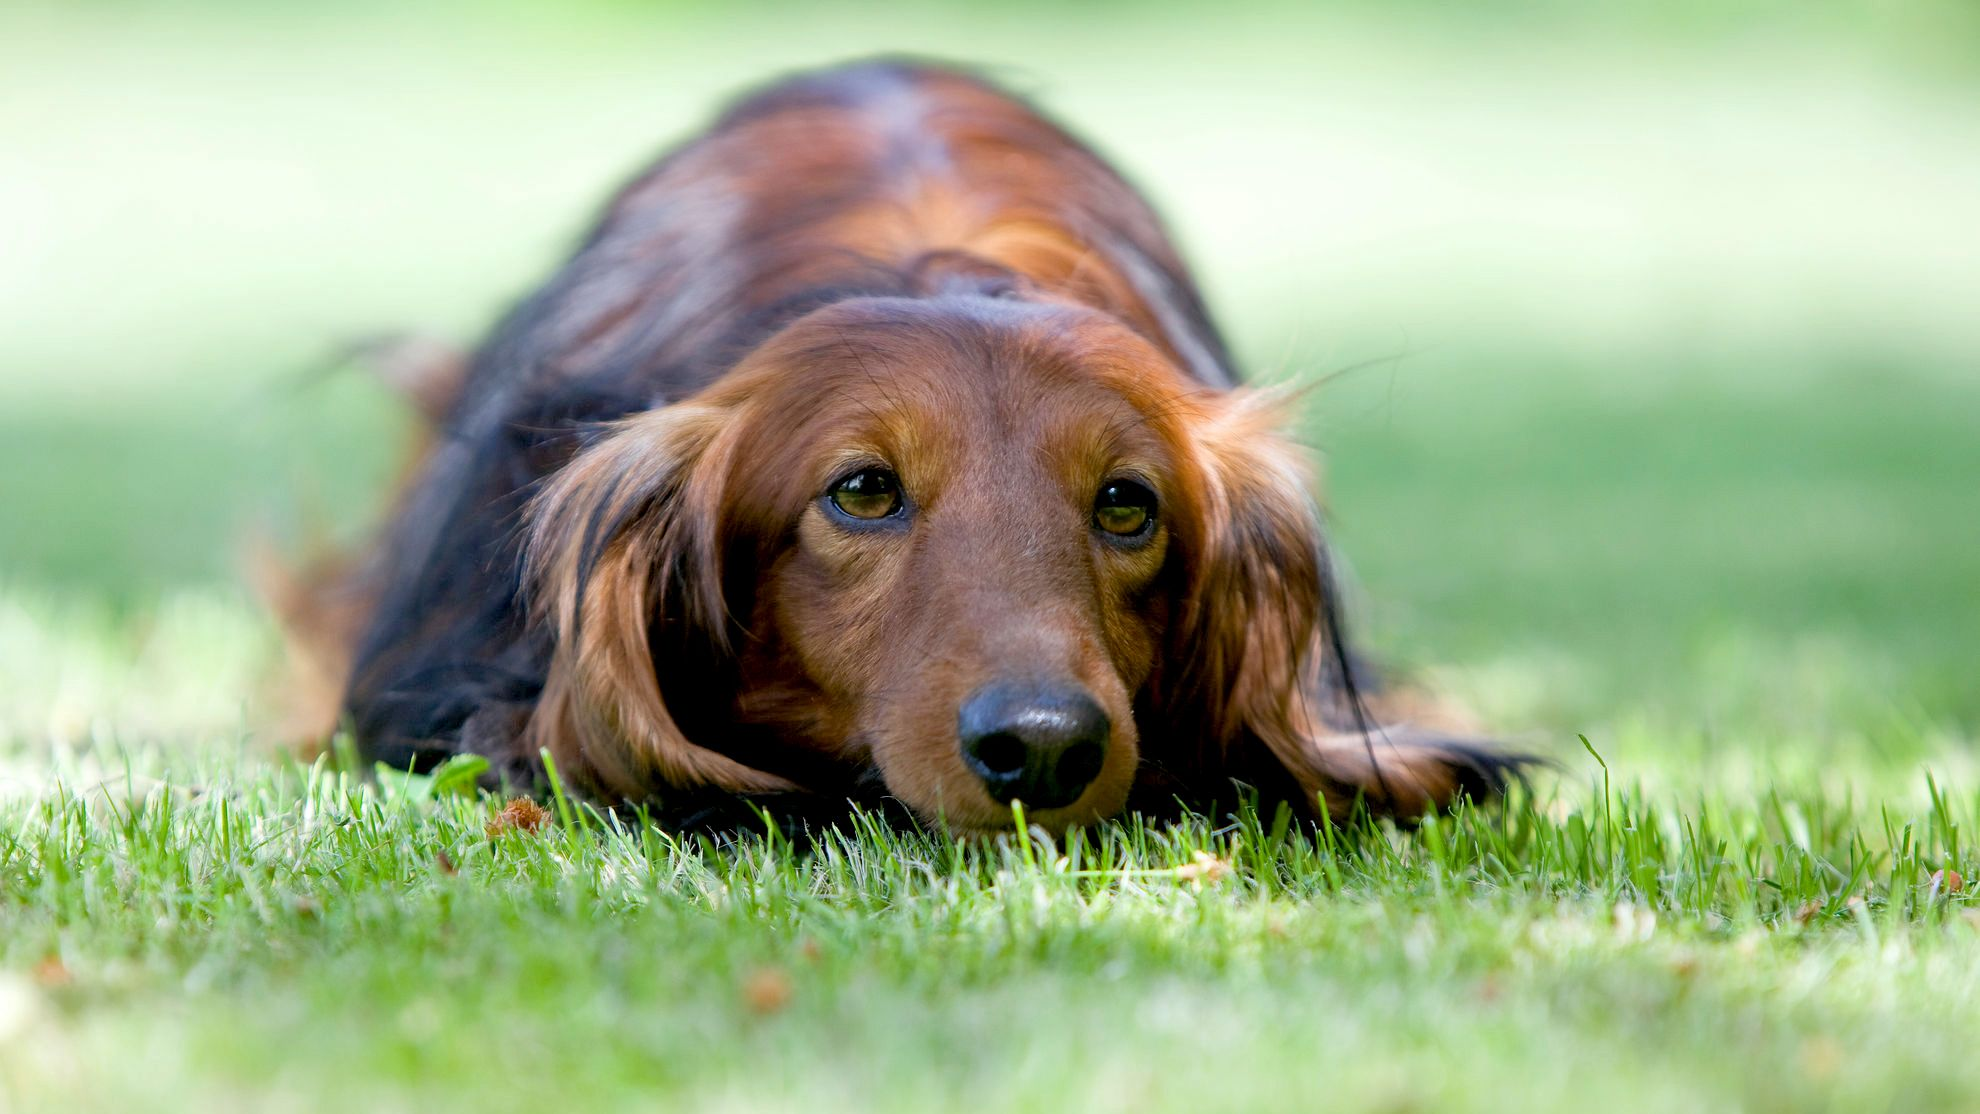 Close-up of Dachshund lying on grass looking at camera